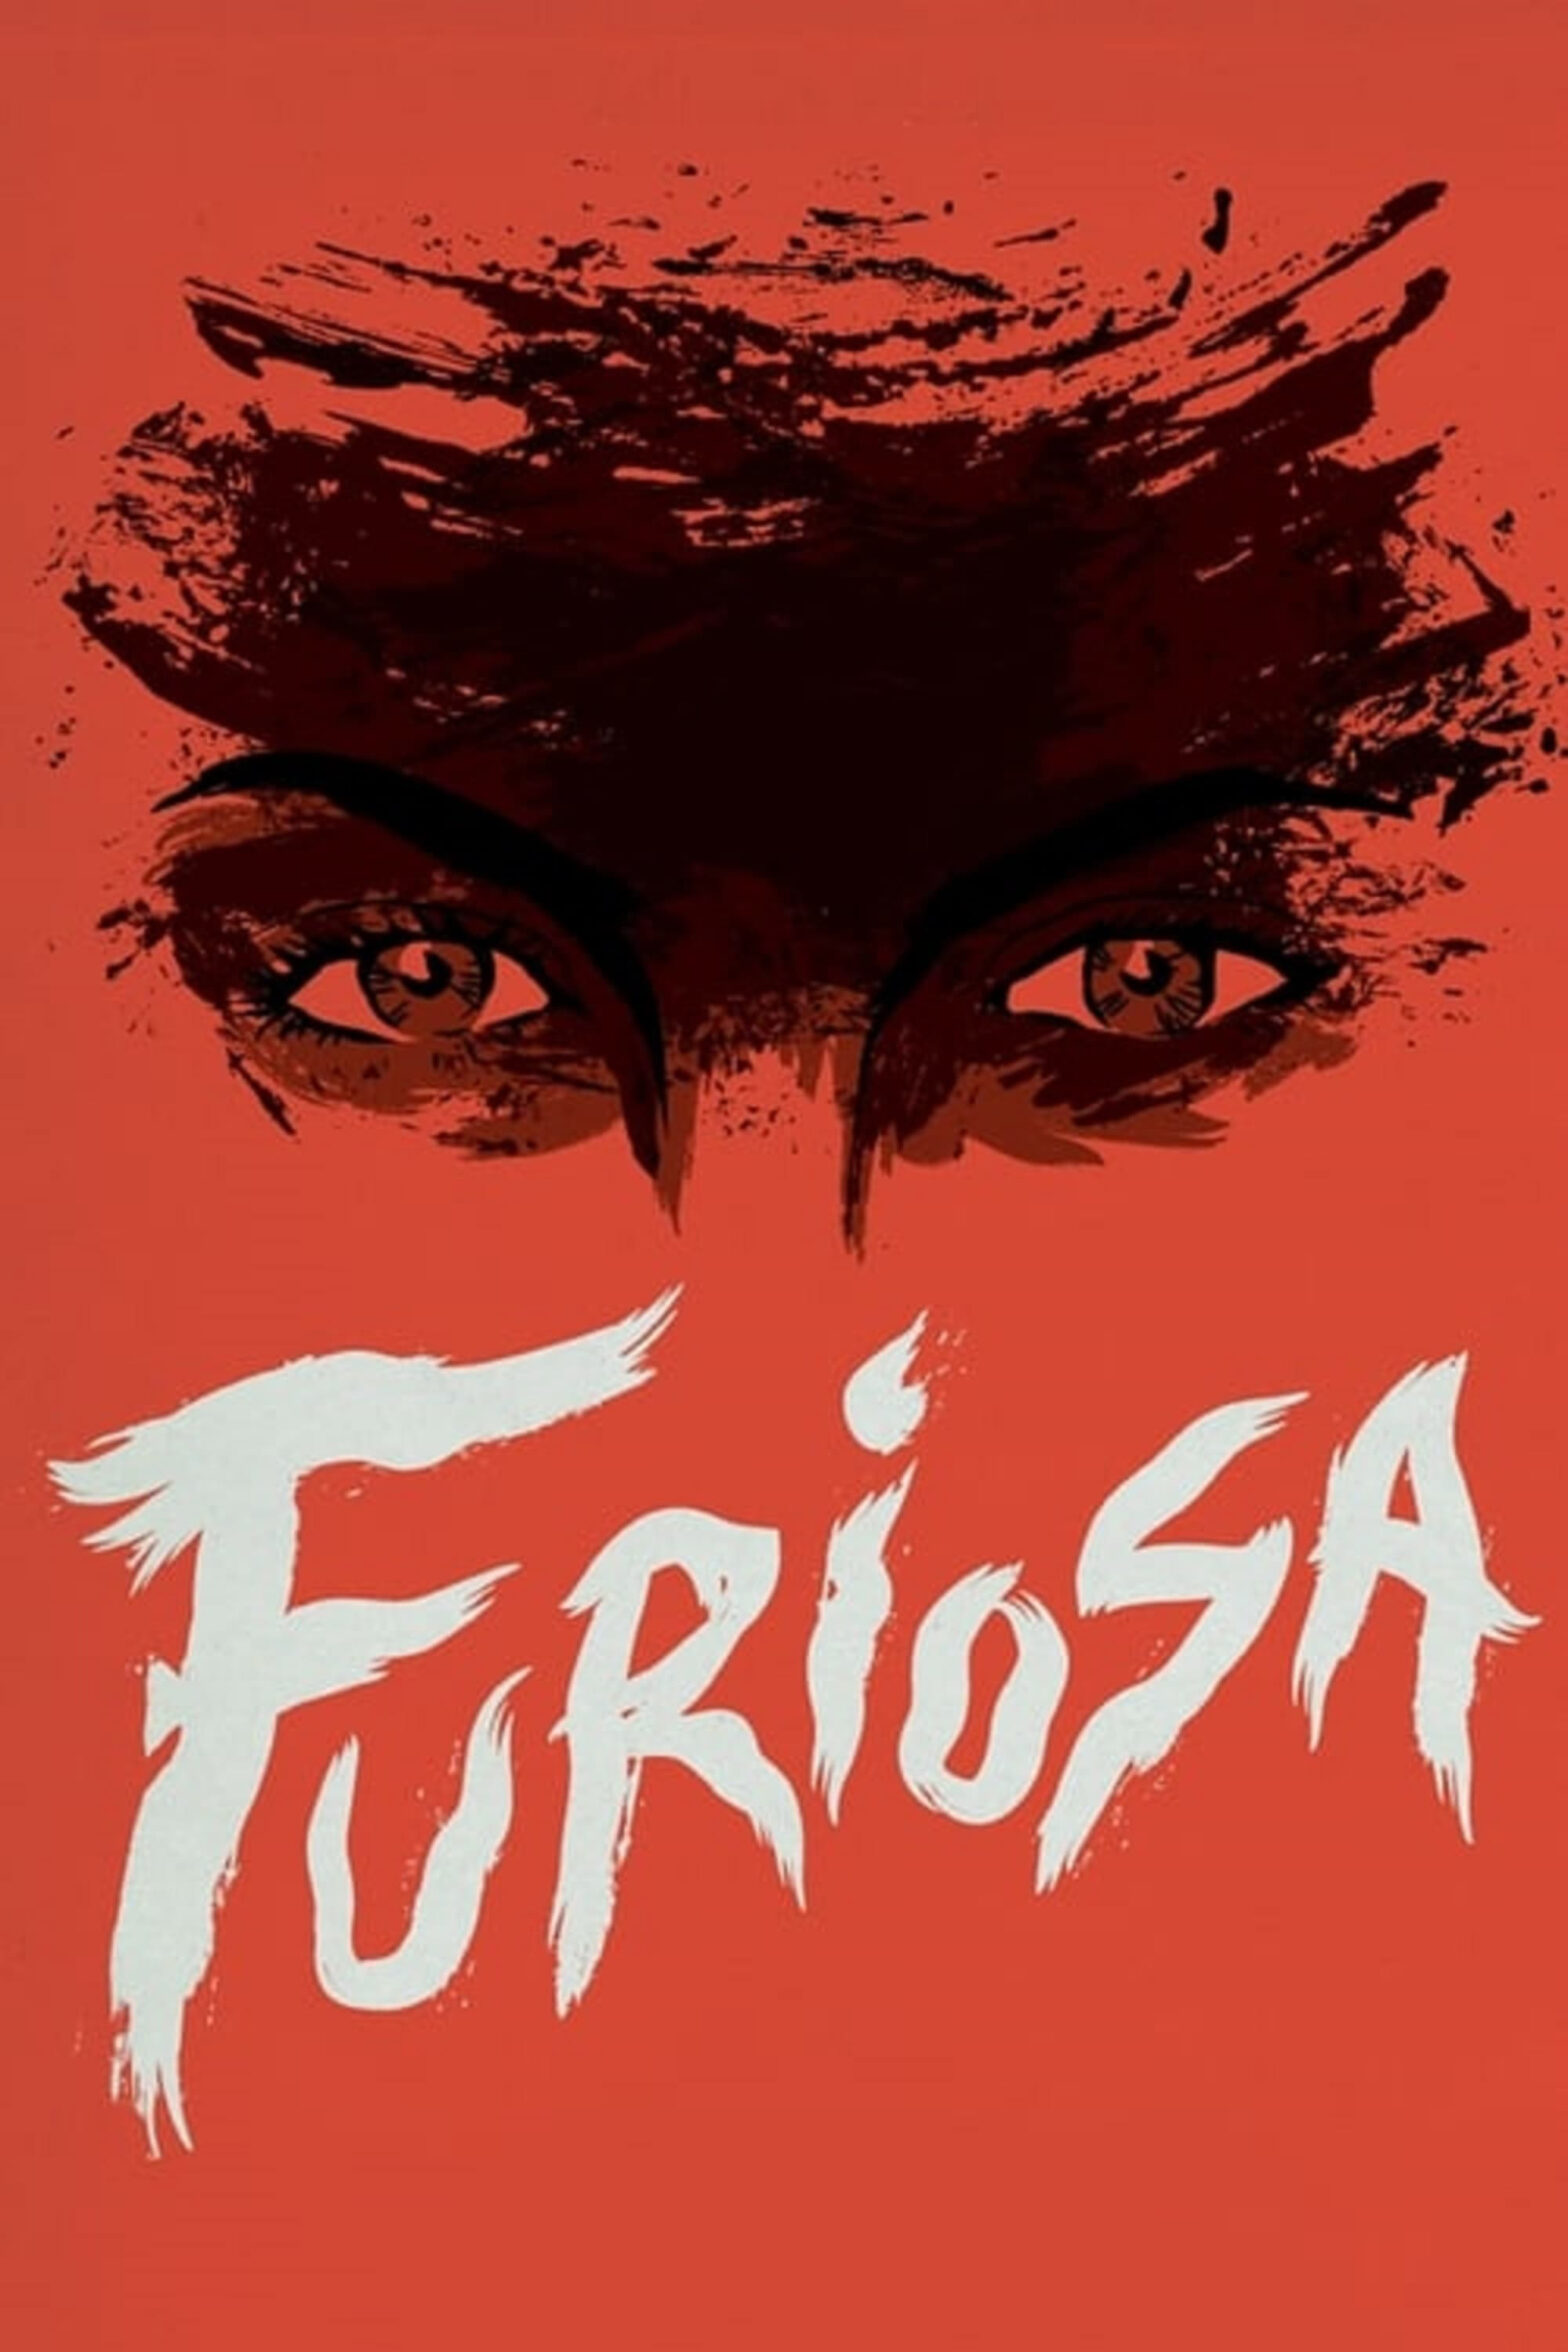 Poster for the movie "Furiosa"